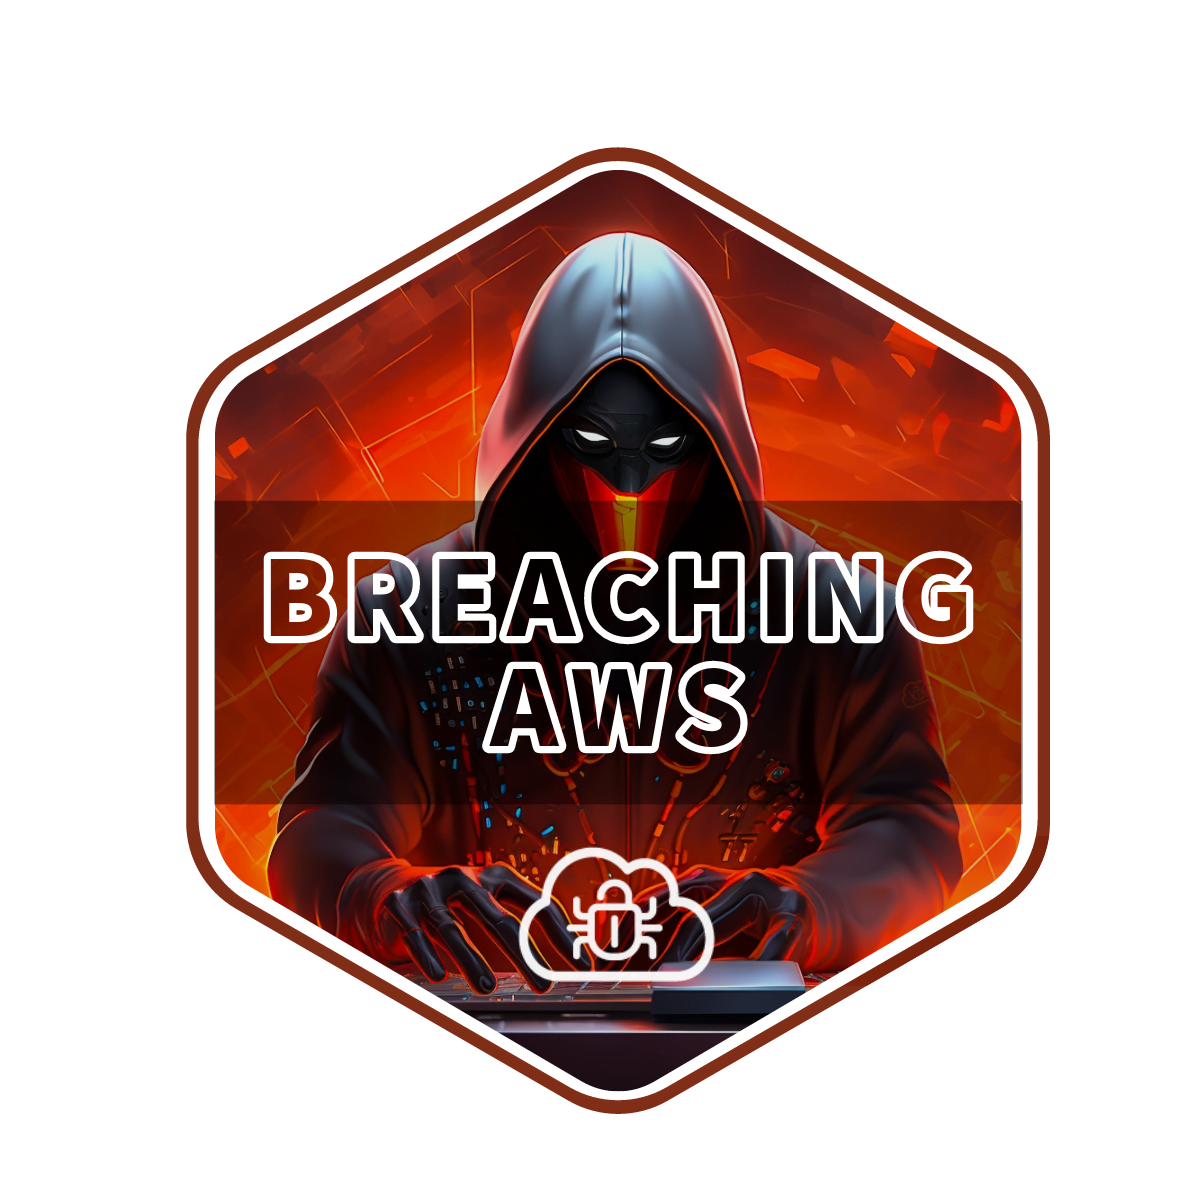 Breaching AWS hands-on security training